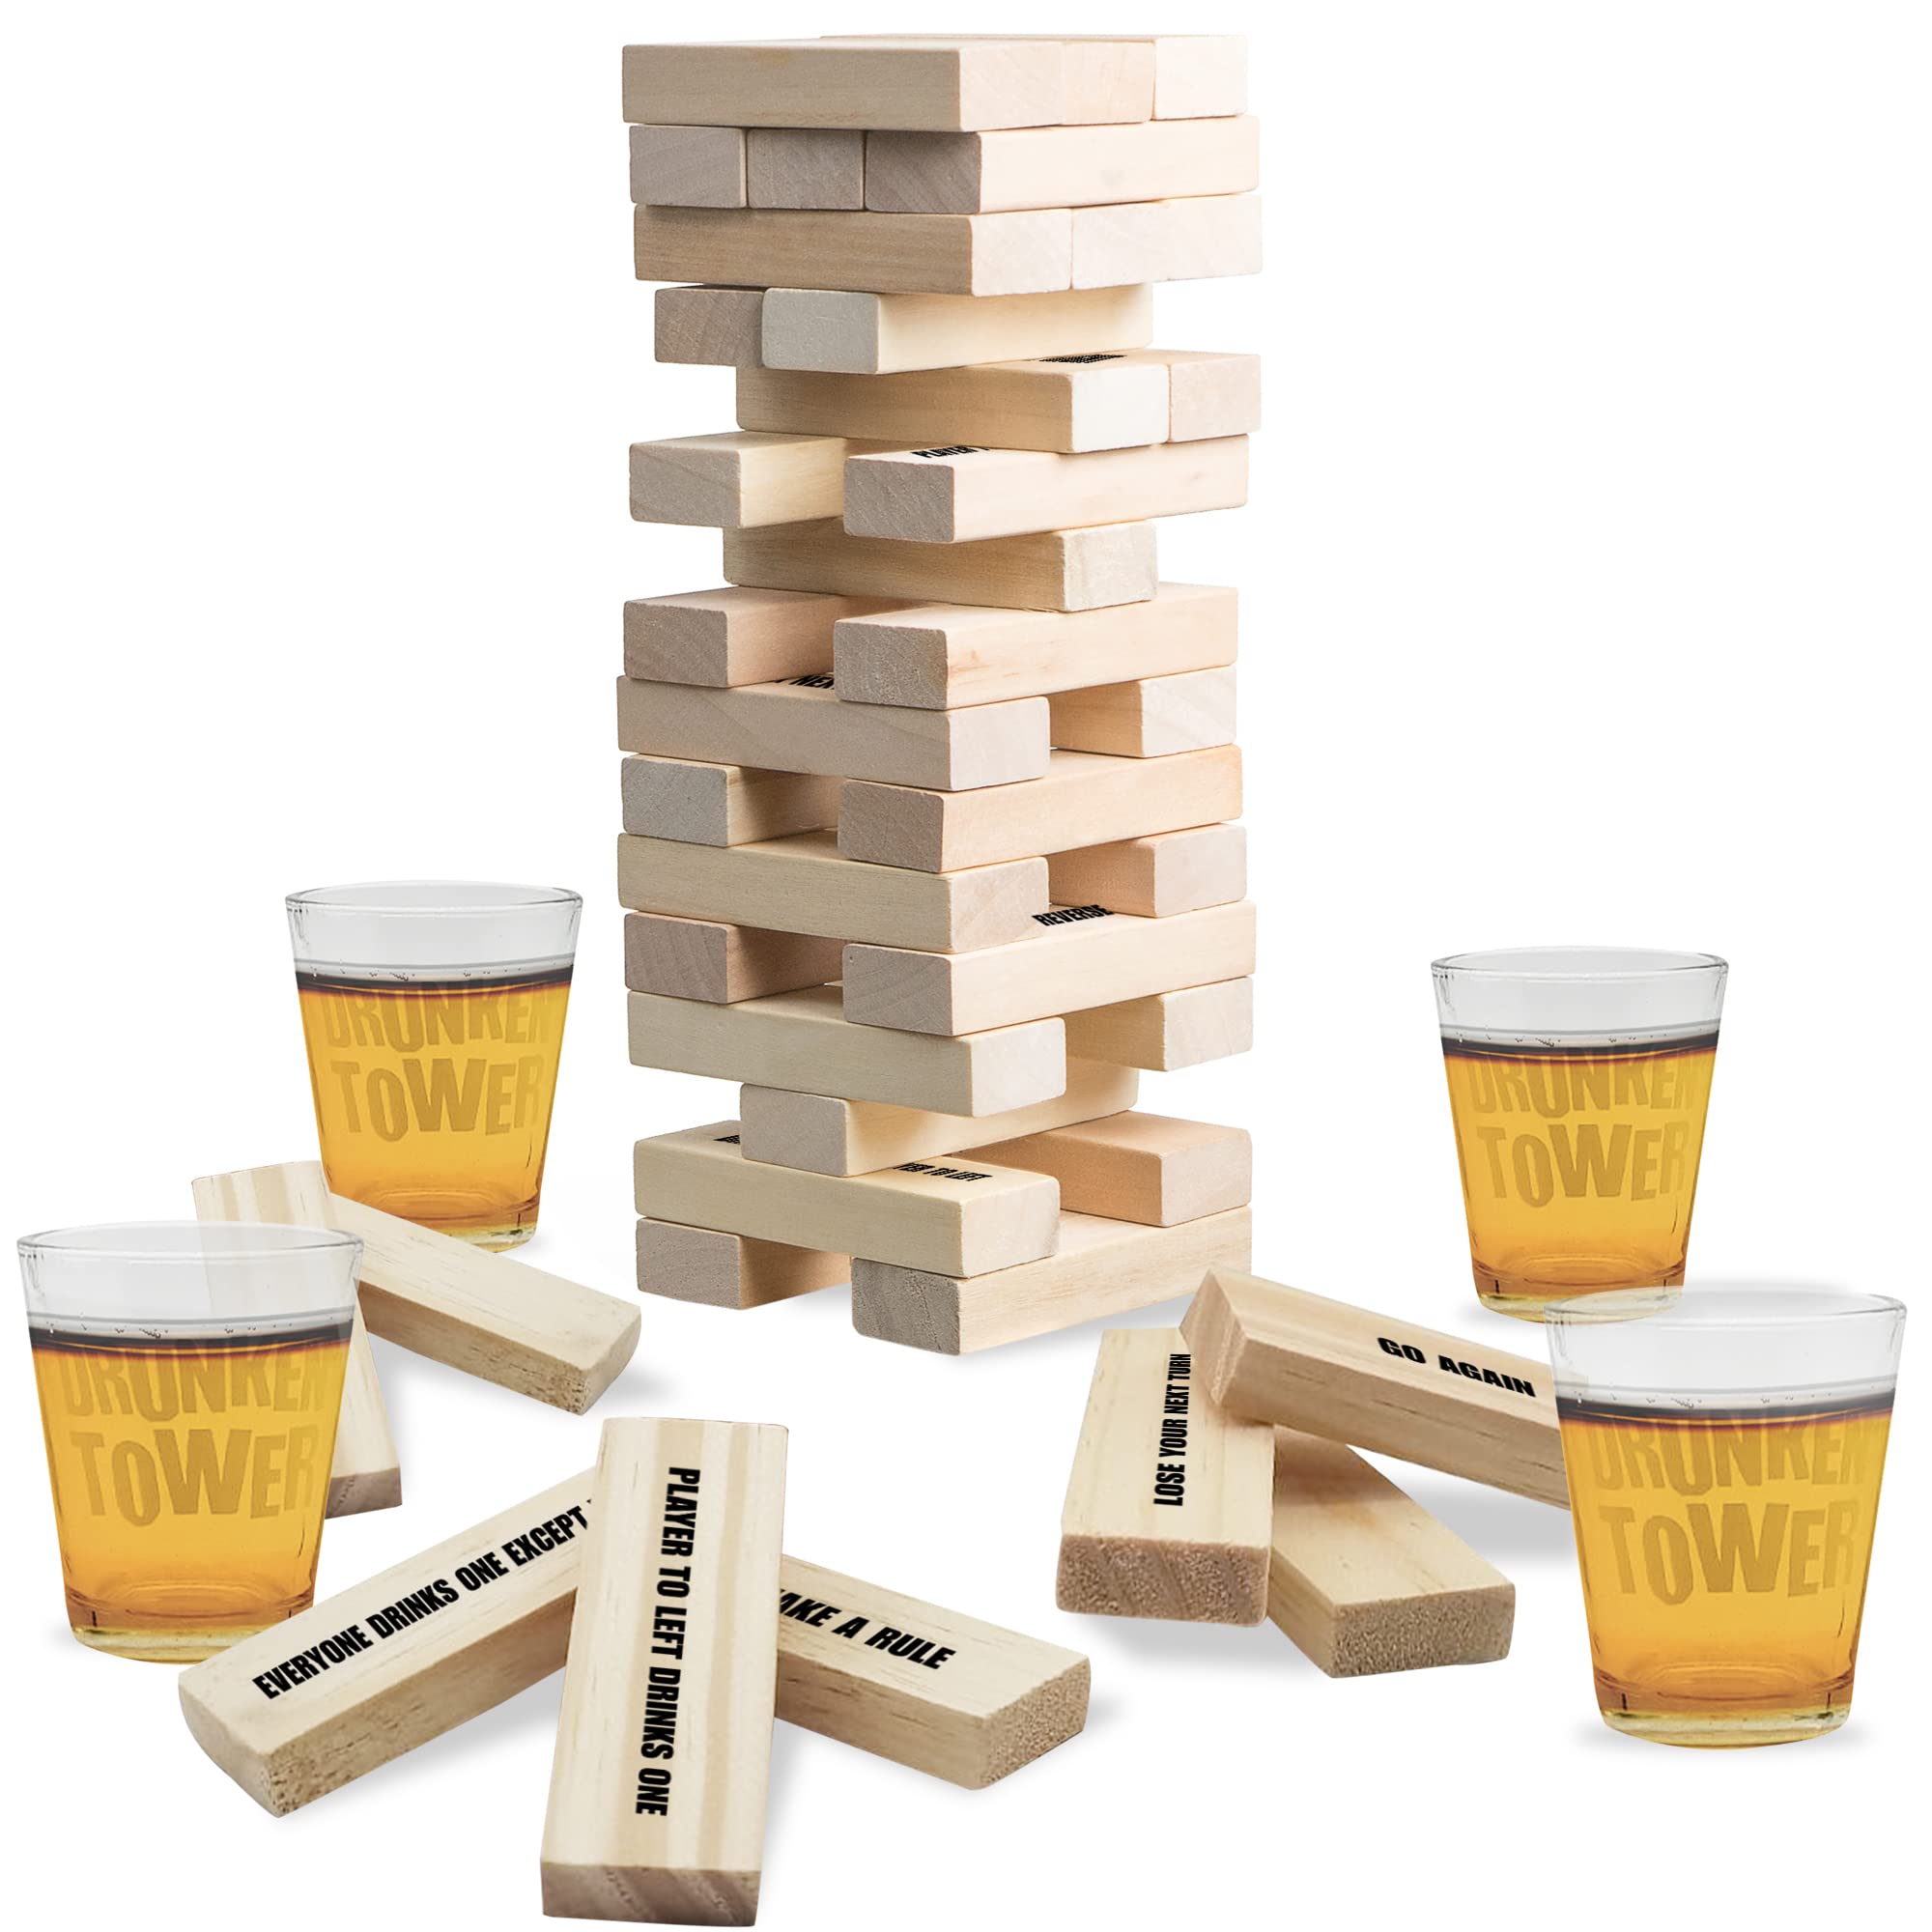 THE TWIDDLERS - Tumbling Tower Drinking Stack Game - 54 Wooden Blocks with  Tasks Commands, Fun Stackable Party Games for Adults, Freshers, Stag & Hen